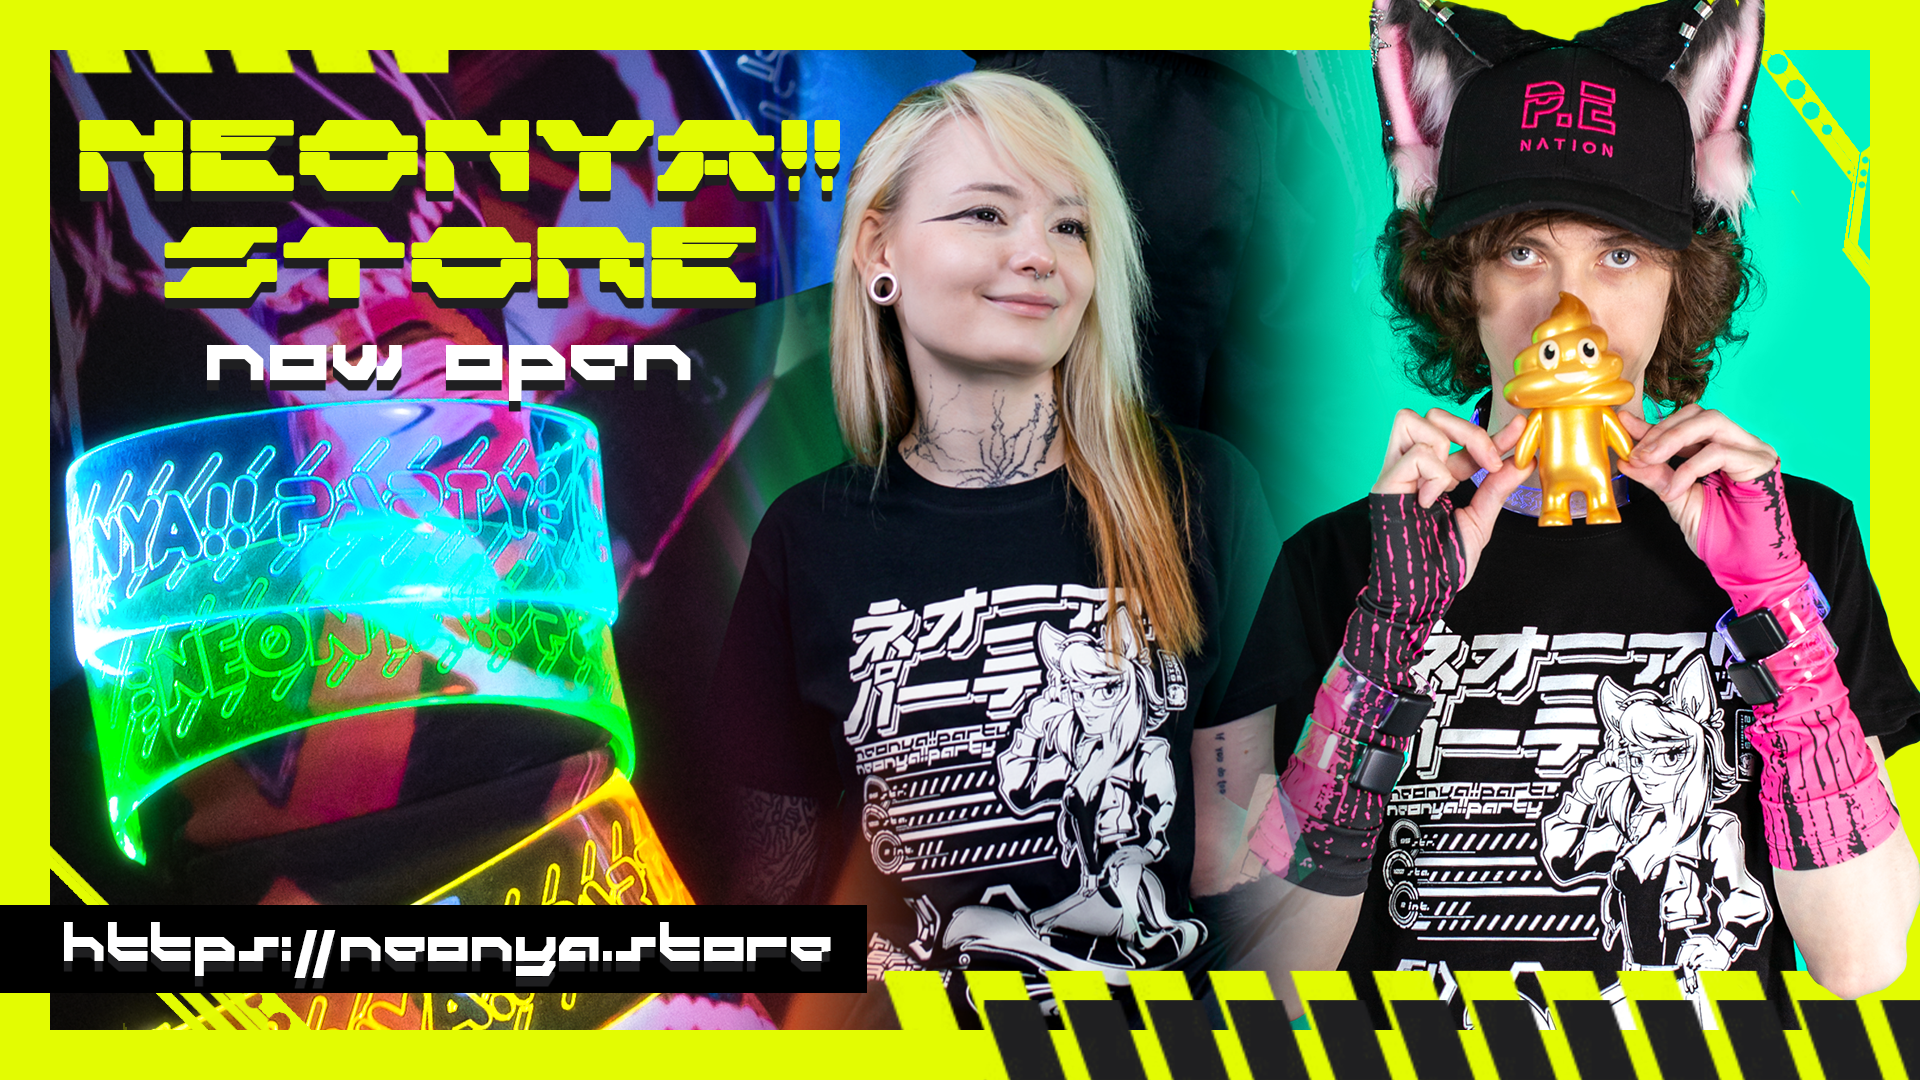 Neonya!! Store now open with 15% off limited Hyper Speed Rave T-shirts